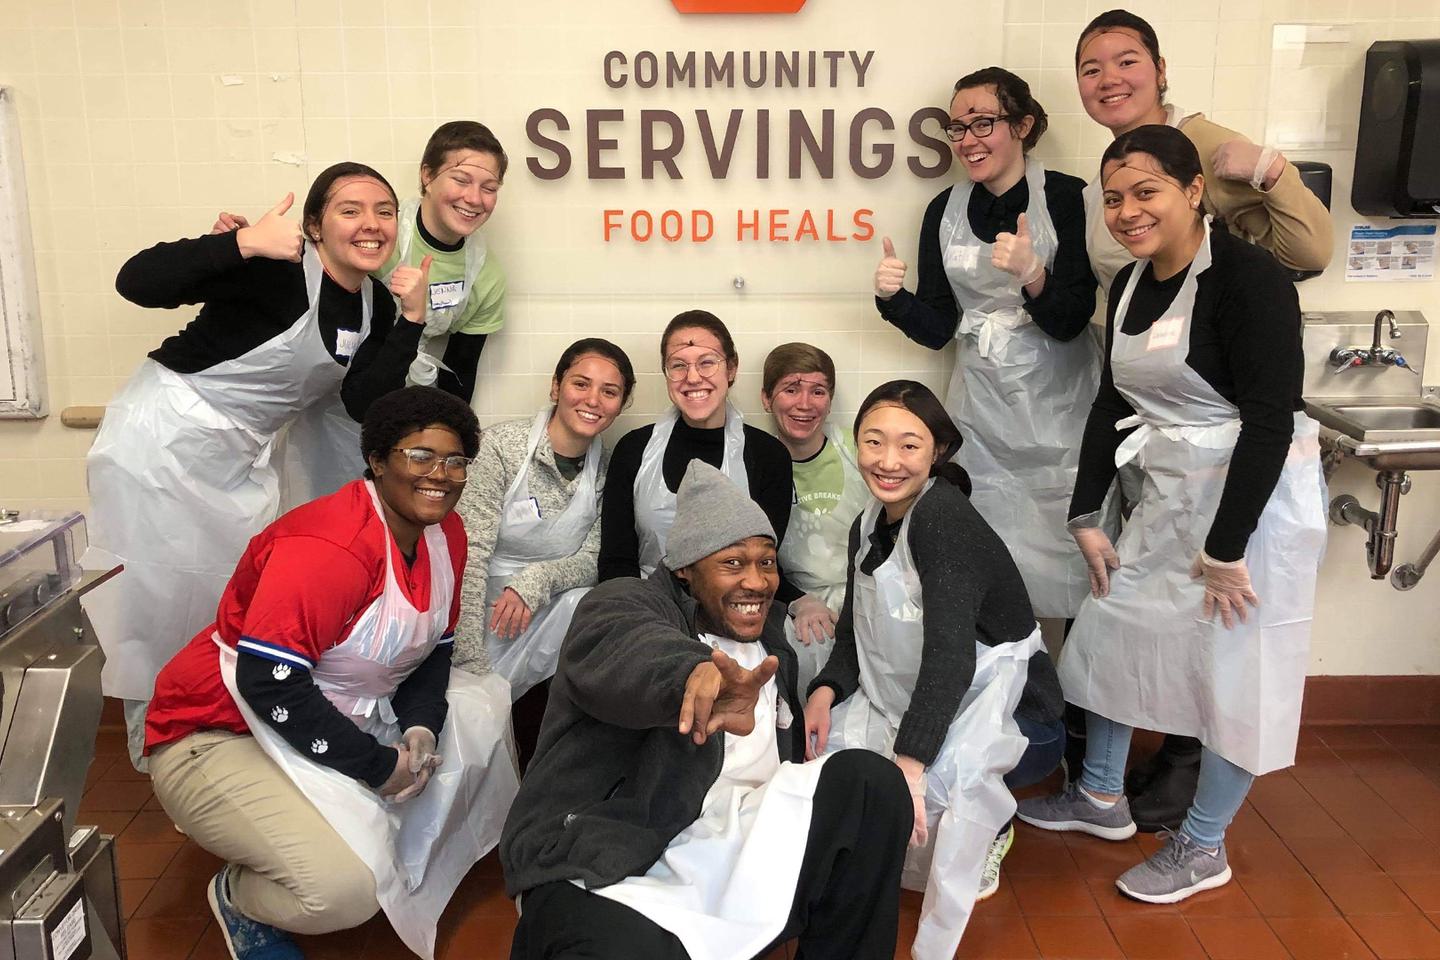 A group photo of students at Community Servings, a Boston nonprofit that cooks and delivers food.